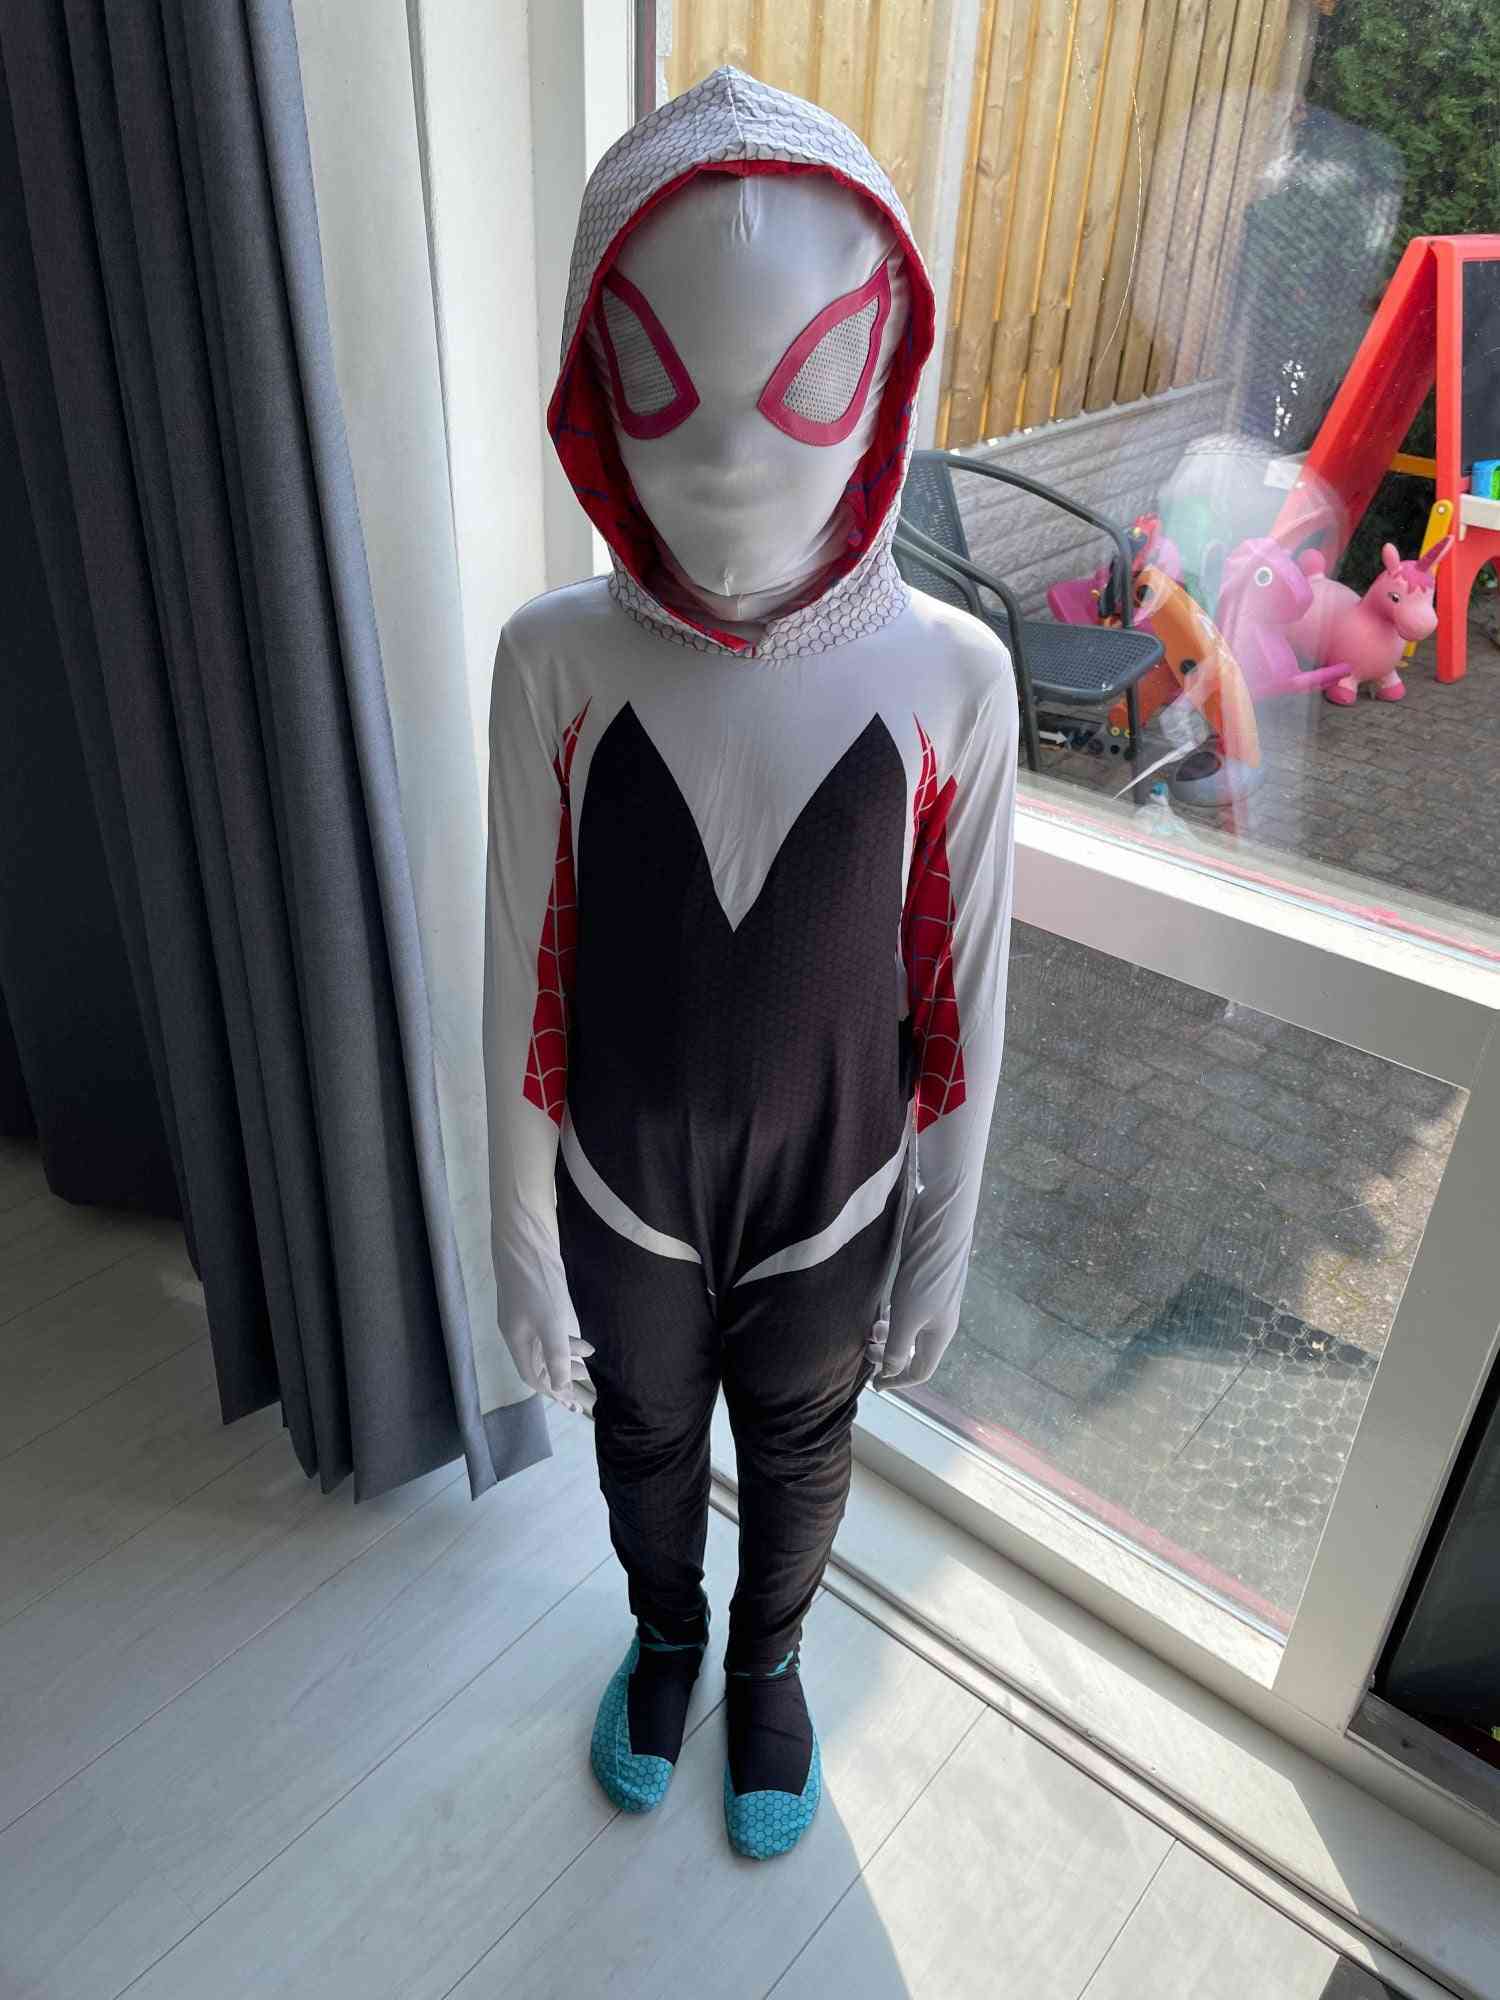 3d Spider Gwen Costume Jumpsuits & Rompers Set For Adults / Kids Women